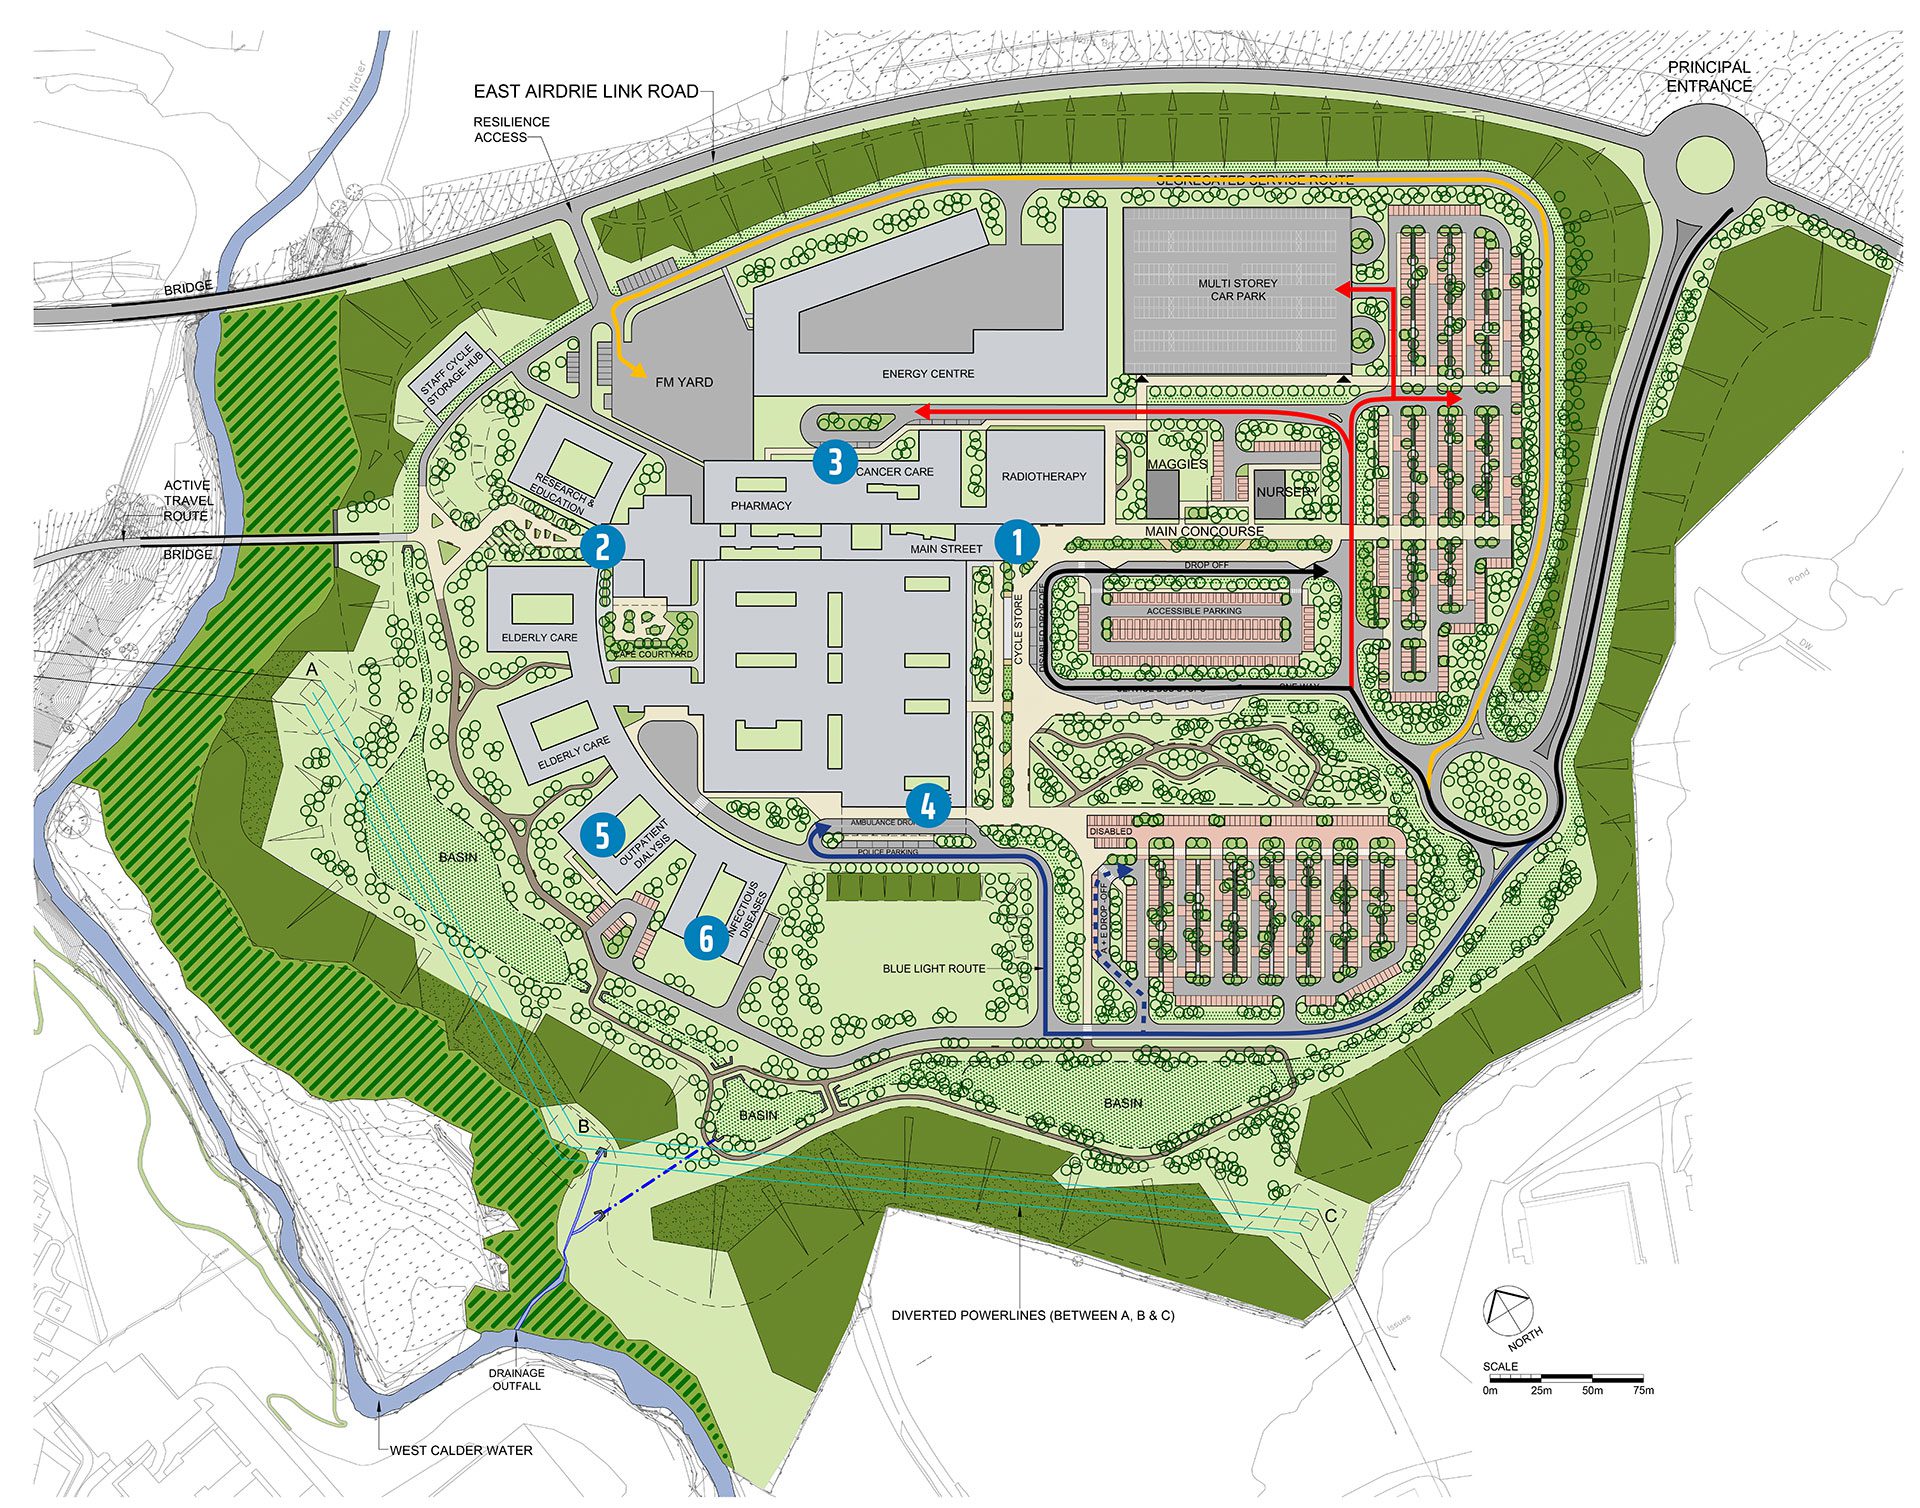 Monklands Site Plan and Traffic Flow